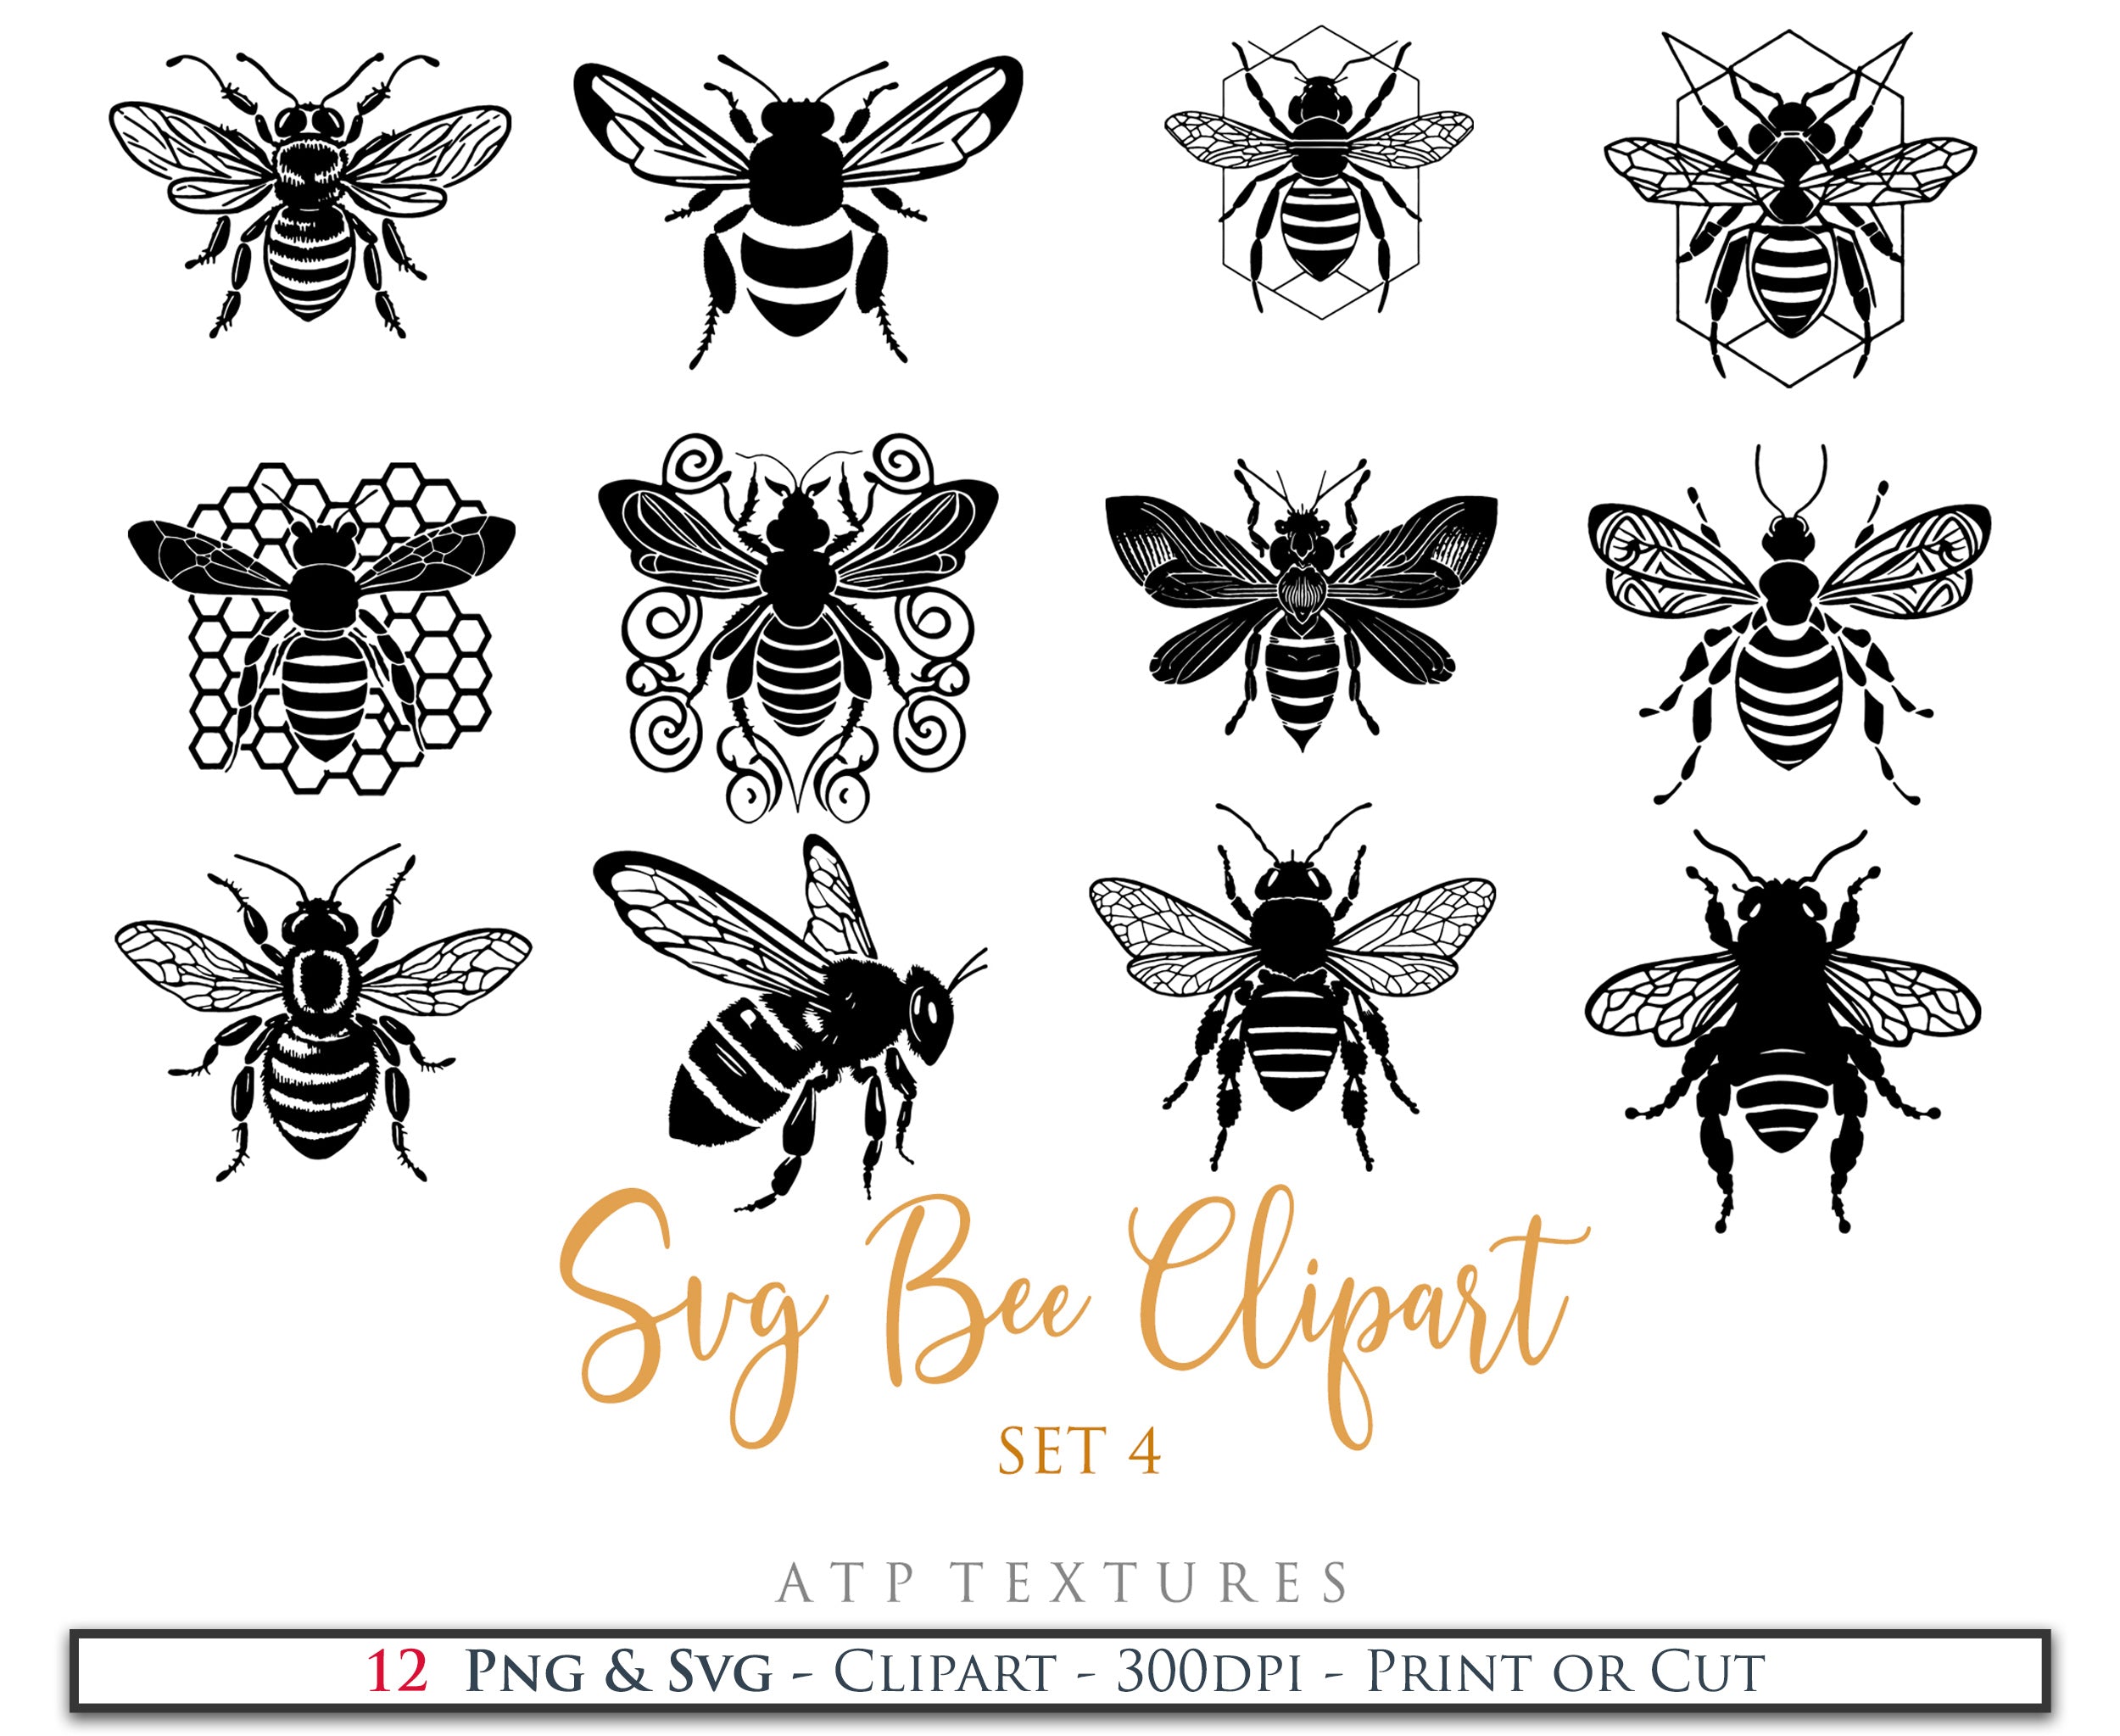 SVG Clipart for Cricut, Digital Art, Sublimation Print and Scrapbooking.Sweet Bees in High resolution.This is a digital product. This set includes 20 SVG & PNG Bee Clipart files. The PNG files are all in high resolution,300dpi.If you wish to use them for your fine art prints and photography edits without losing quality, you can! ATP Textures